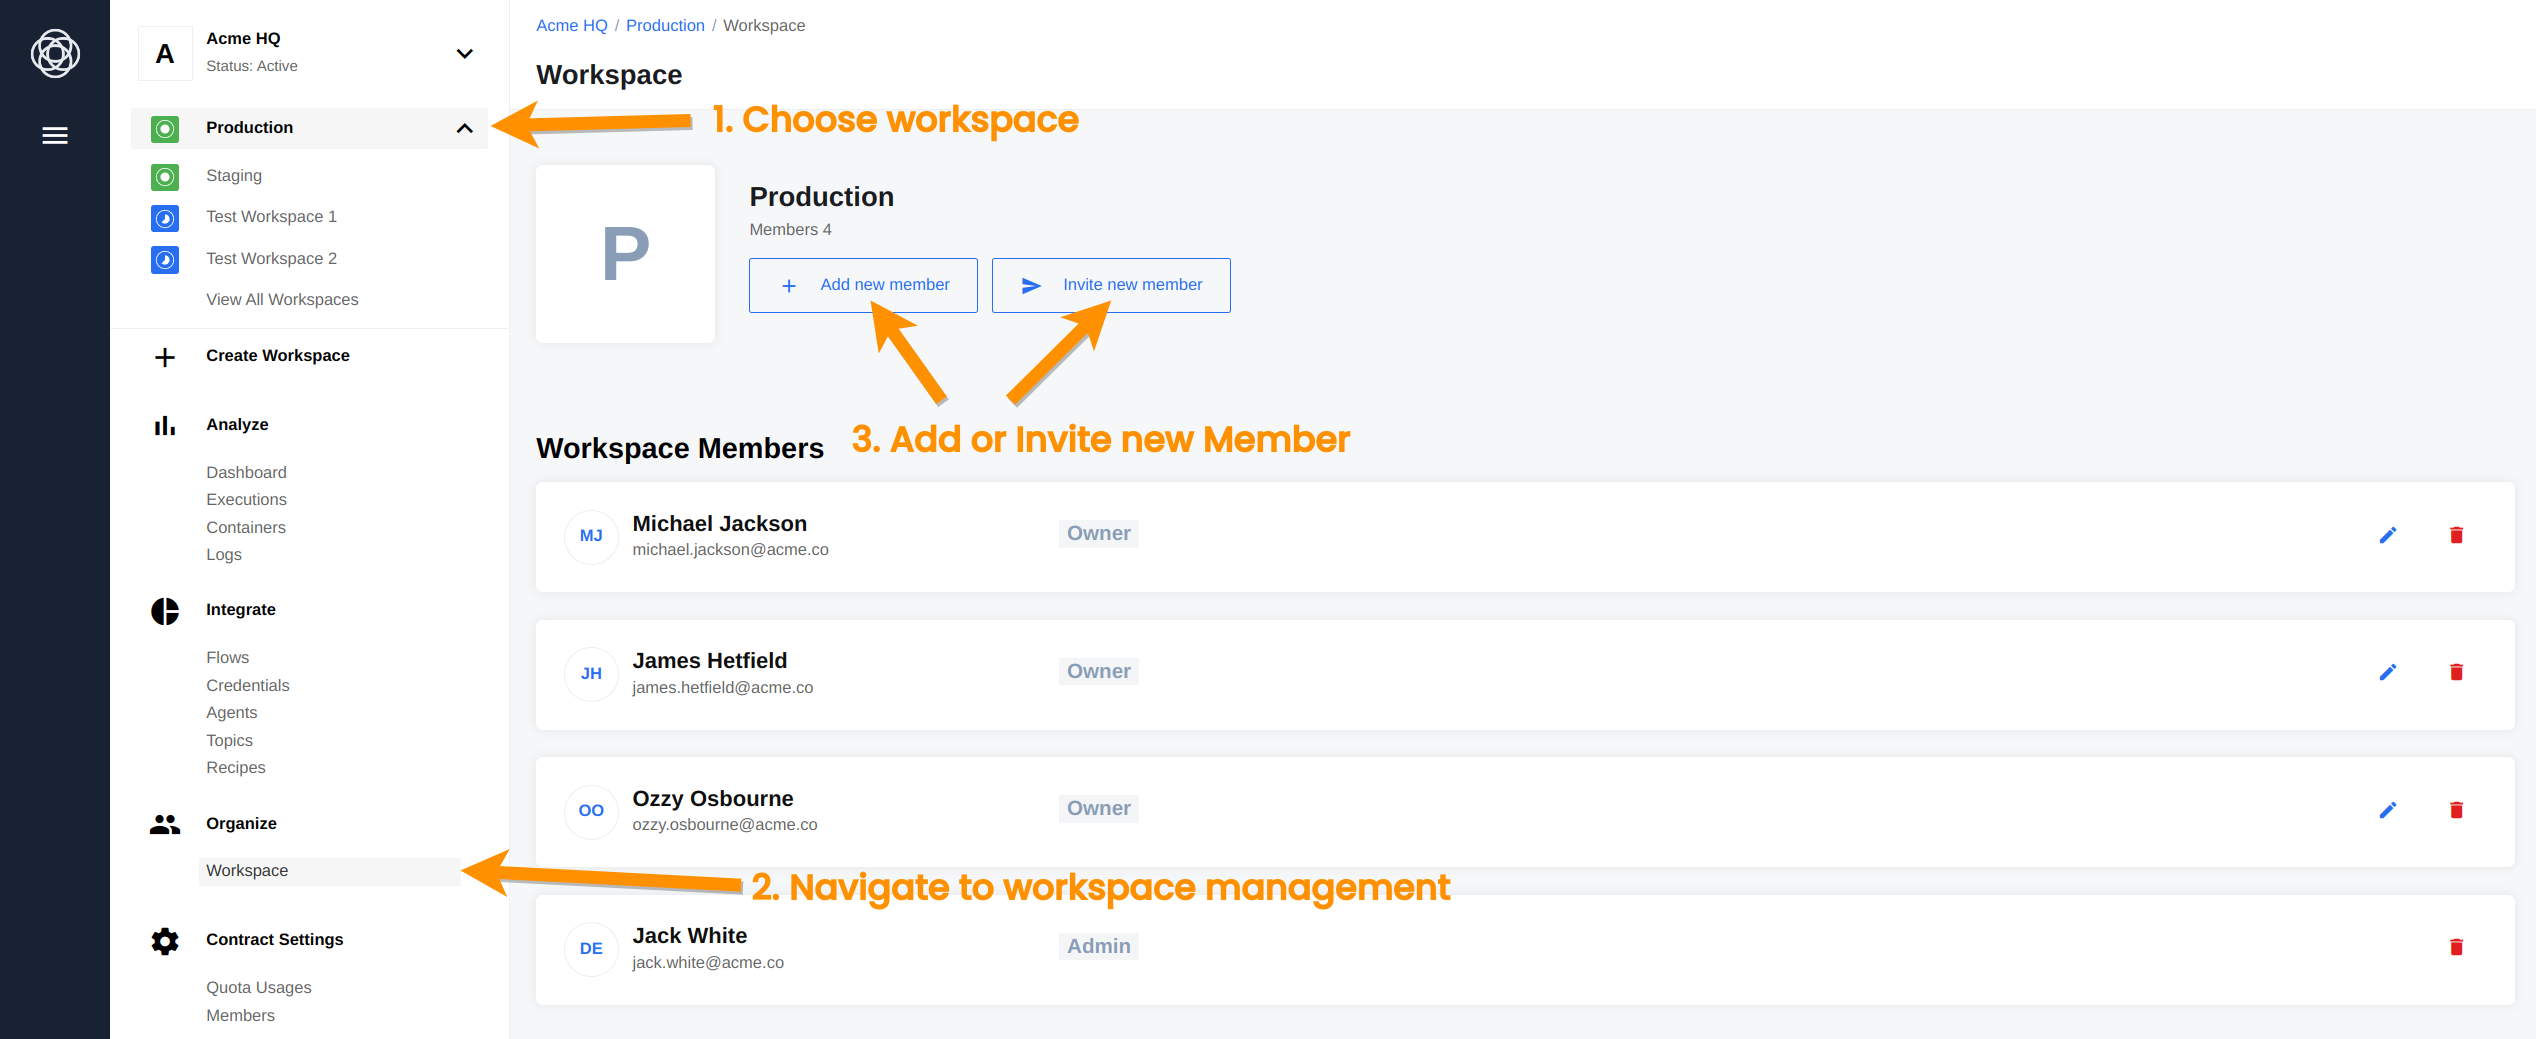 Workspace management page to add and invite members.